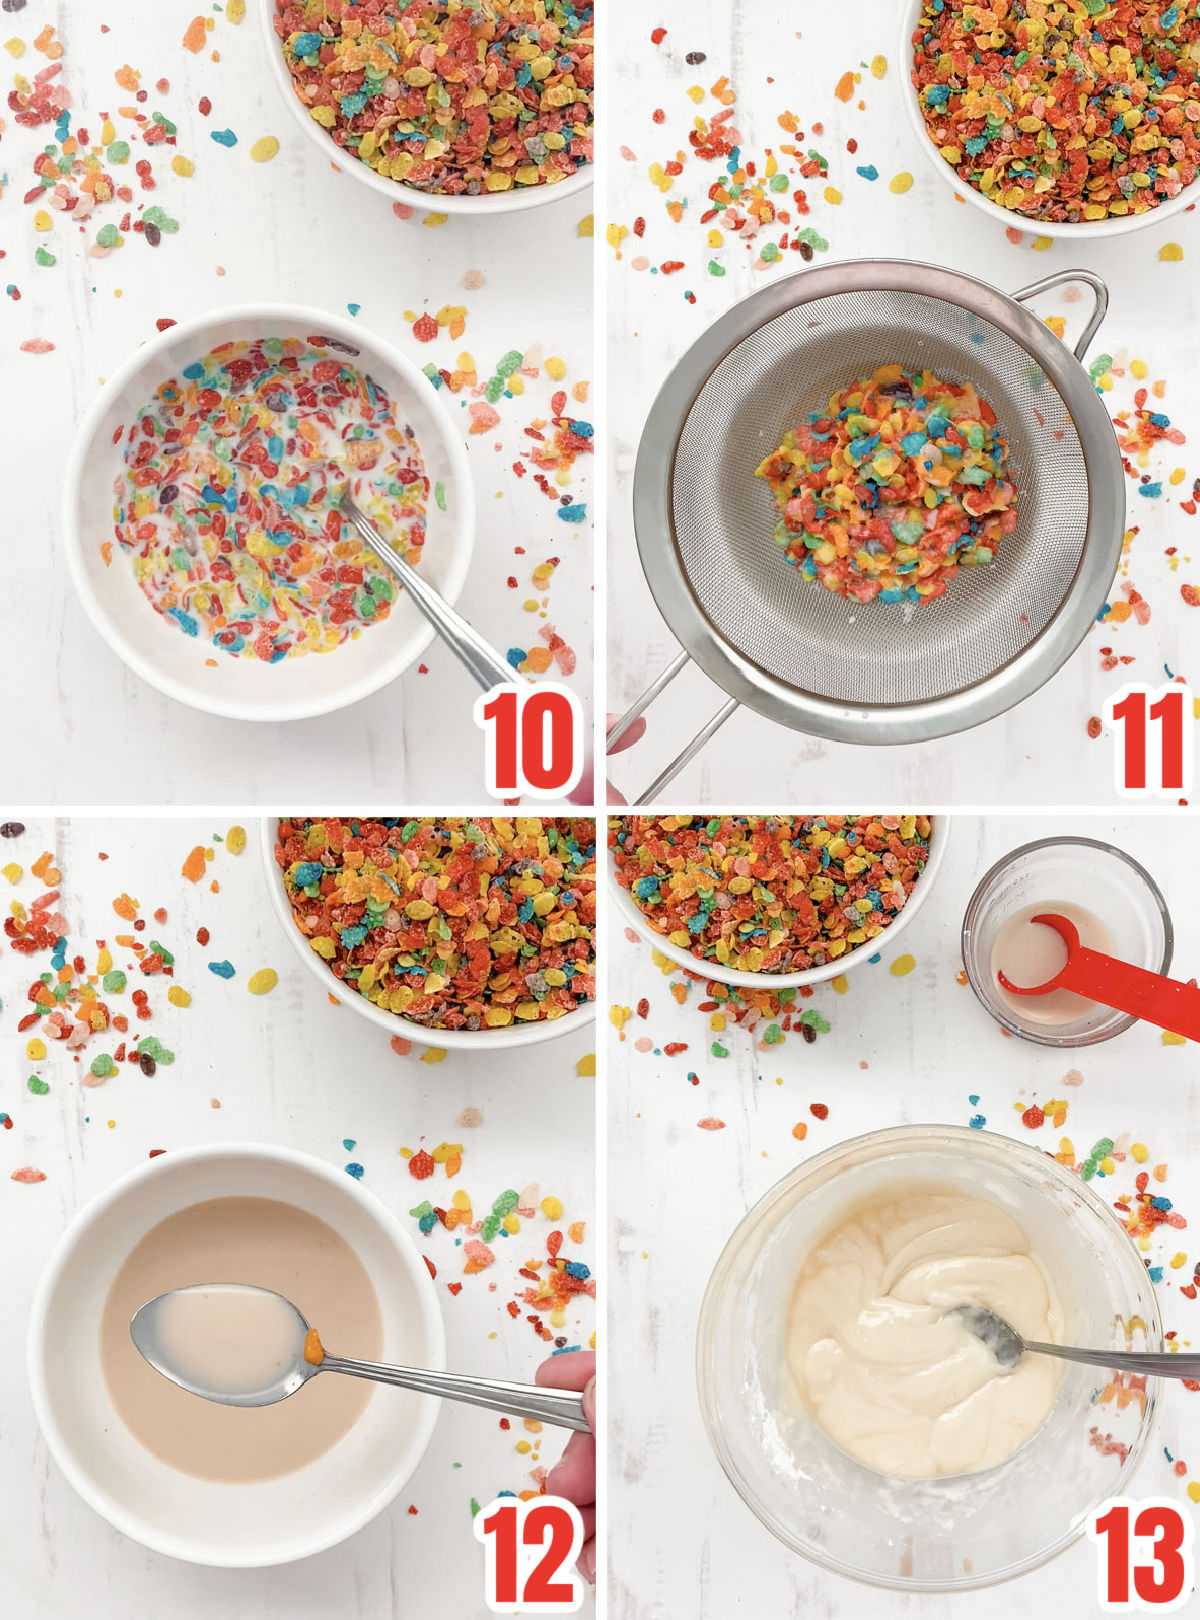 Collage image showing how to make the Cereal Milk Icing for the sugar cookies.